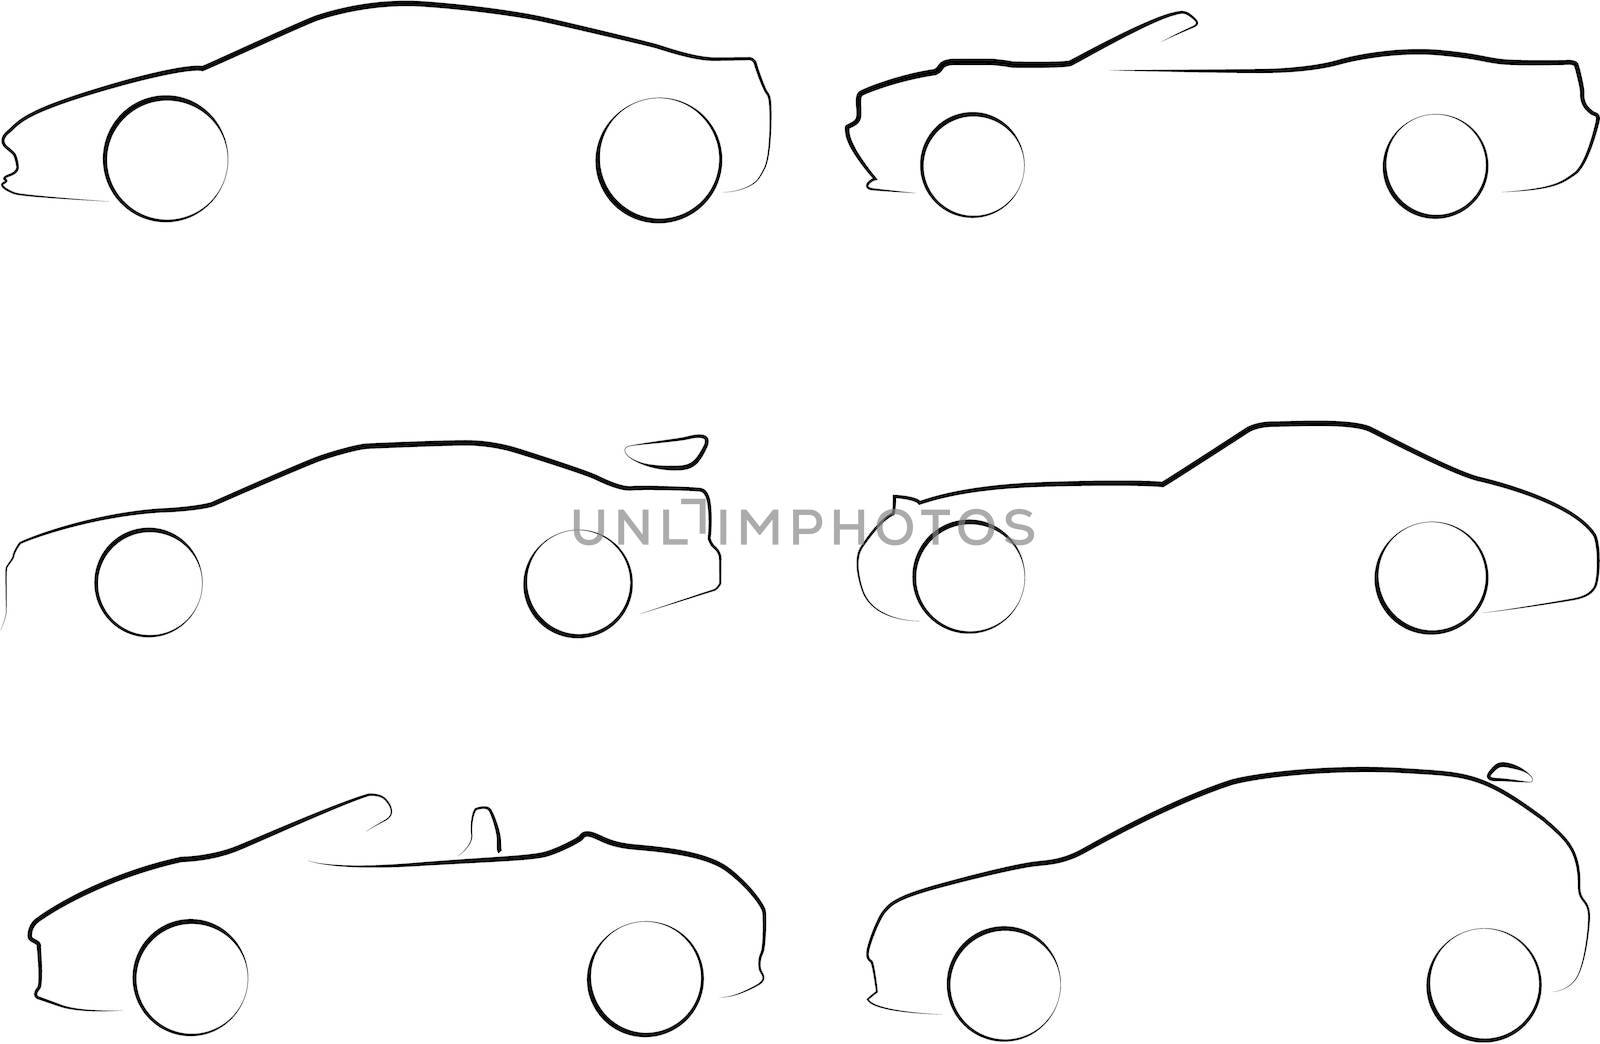 Illustration of Outlines of Cars by DragonEyeMedia